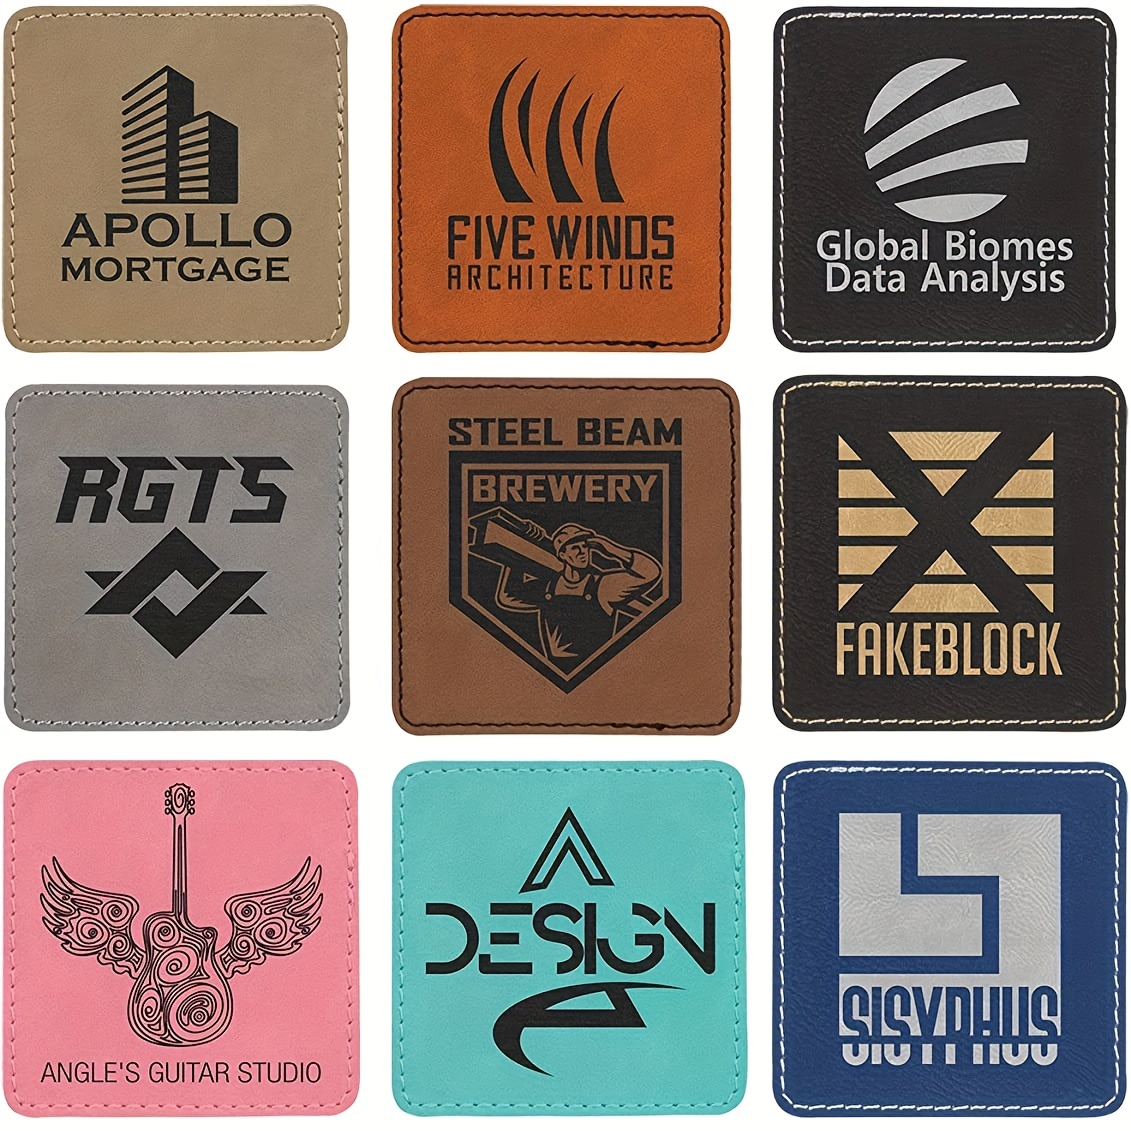 LEATHER PATCHES